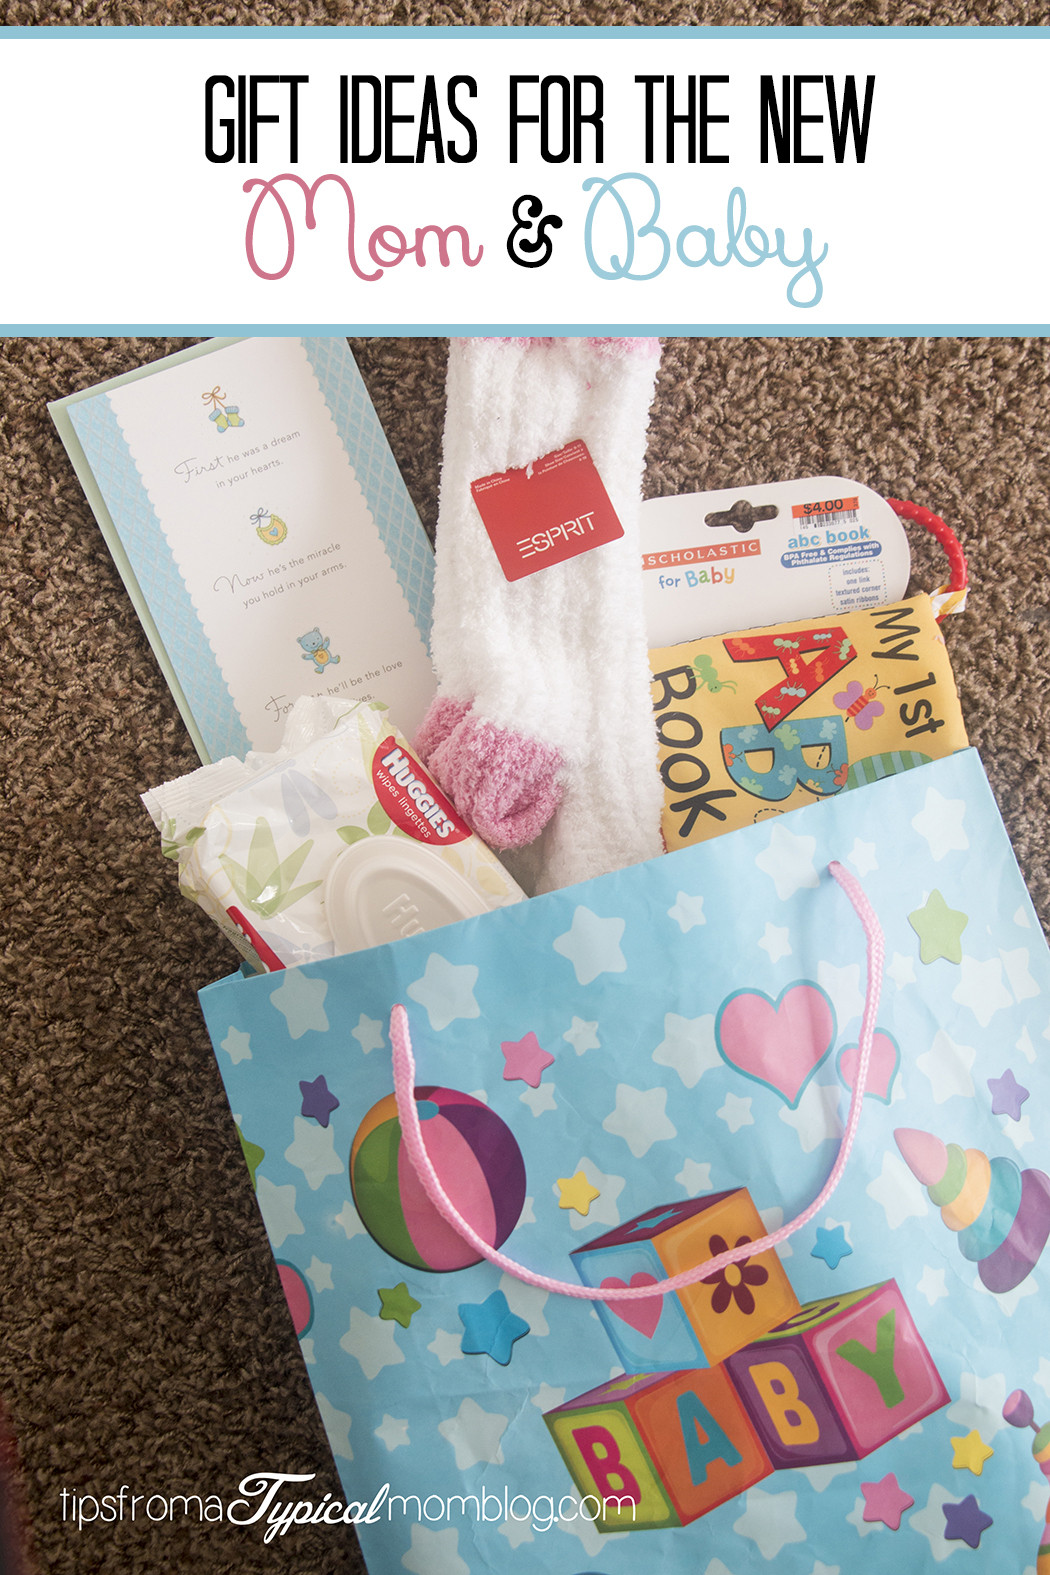 Gift Ideas For Family With New Baby
 Gift Ideas for the New Mom and Baby Tips from a Typical Mom